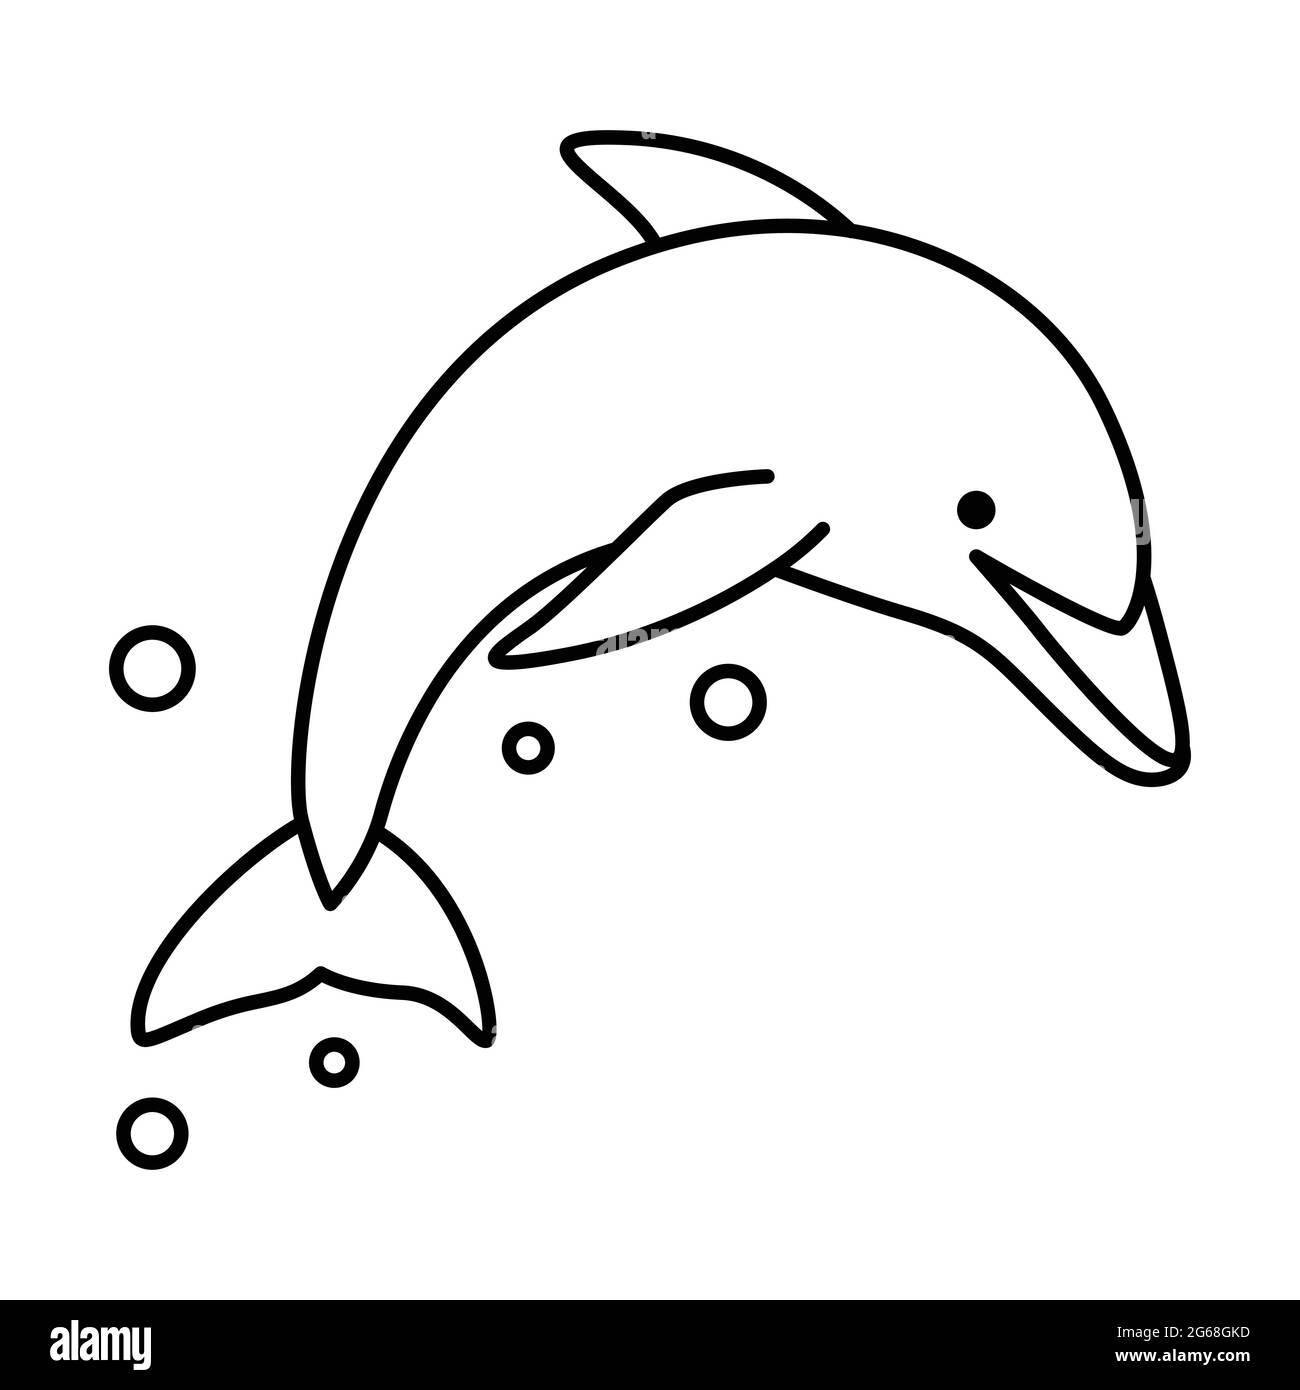 Dolphin · Art Projects for Kids